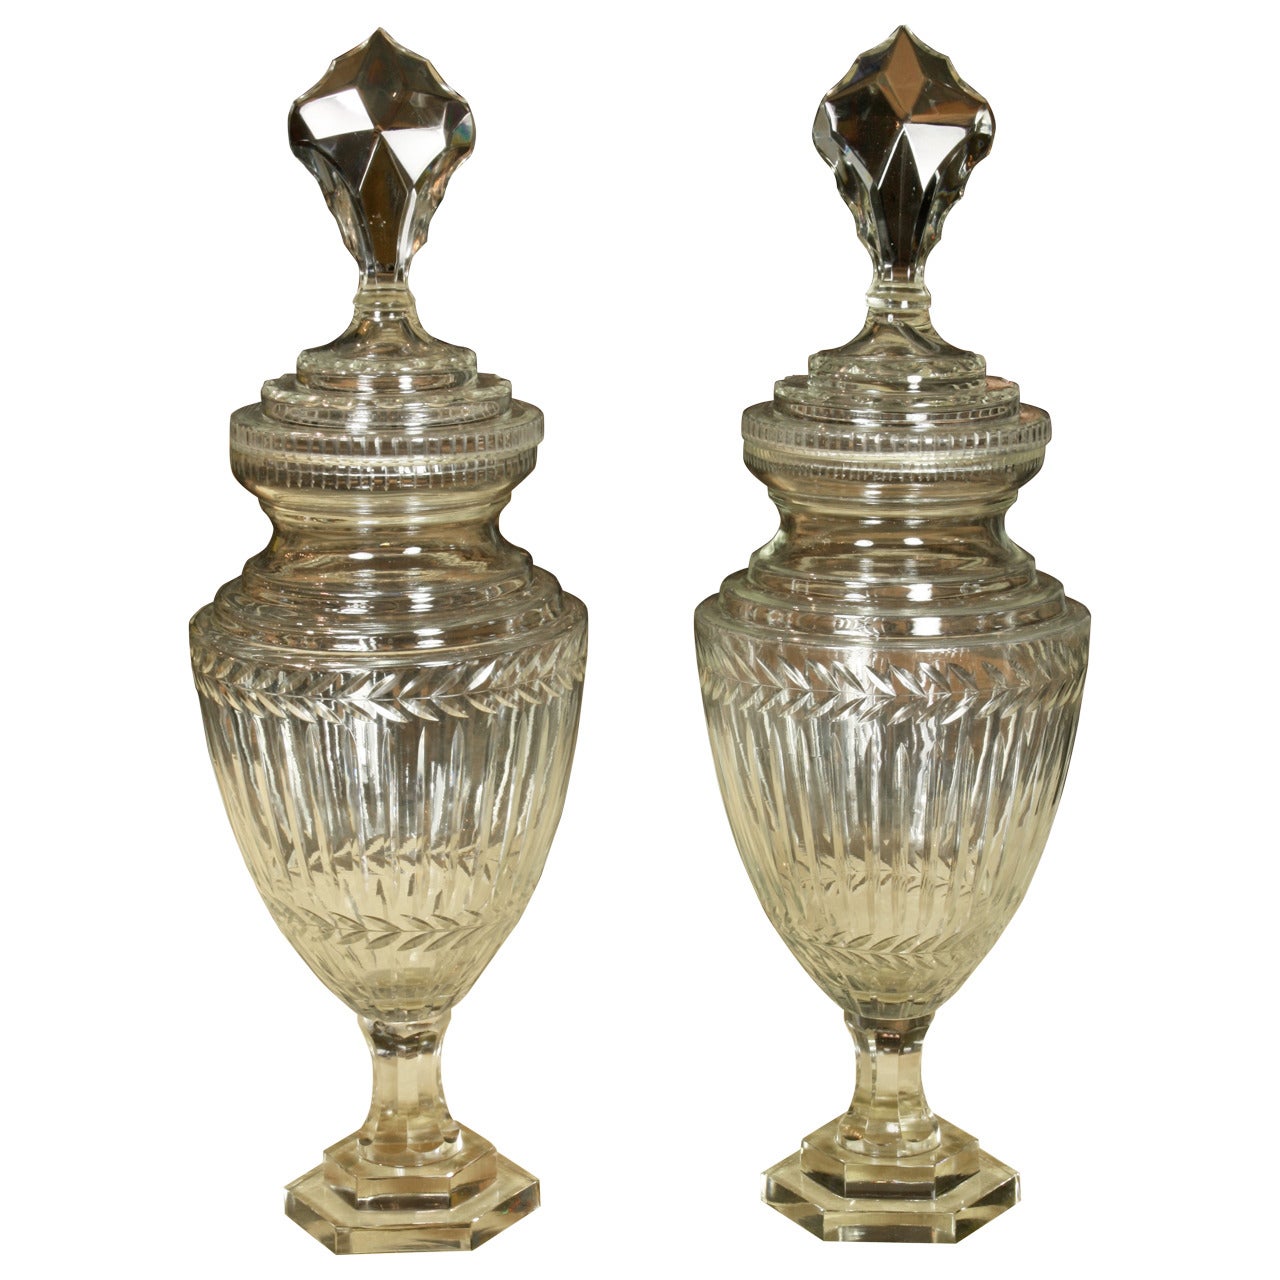 Pair of English Cut-Glass Covered Urns